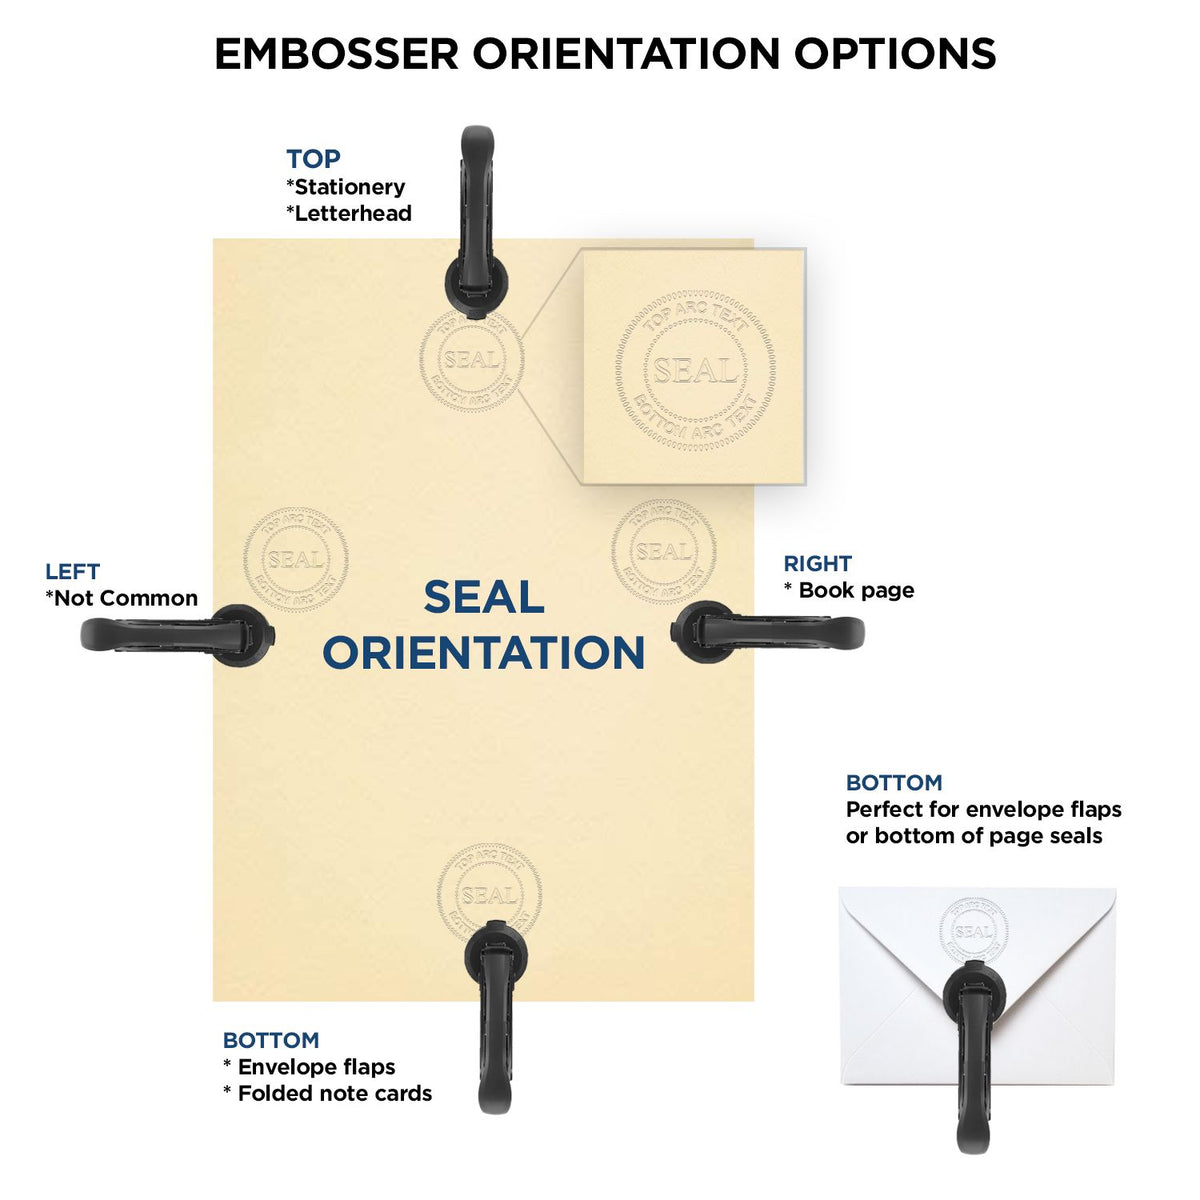 An infographic for the Hybrid Missouri Land Surveyor Seal showing embosser orientation, this is showing examples of a top, bottom, right and left insert.